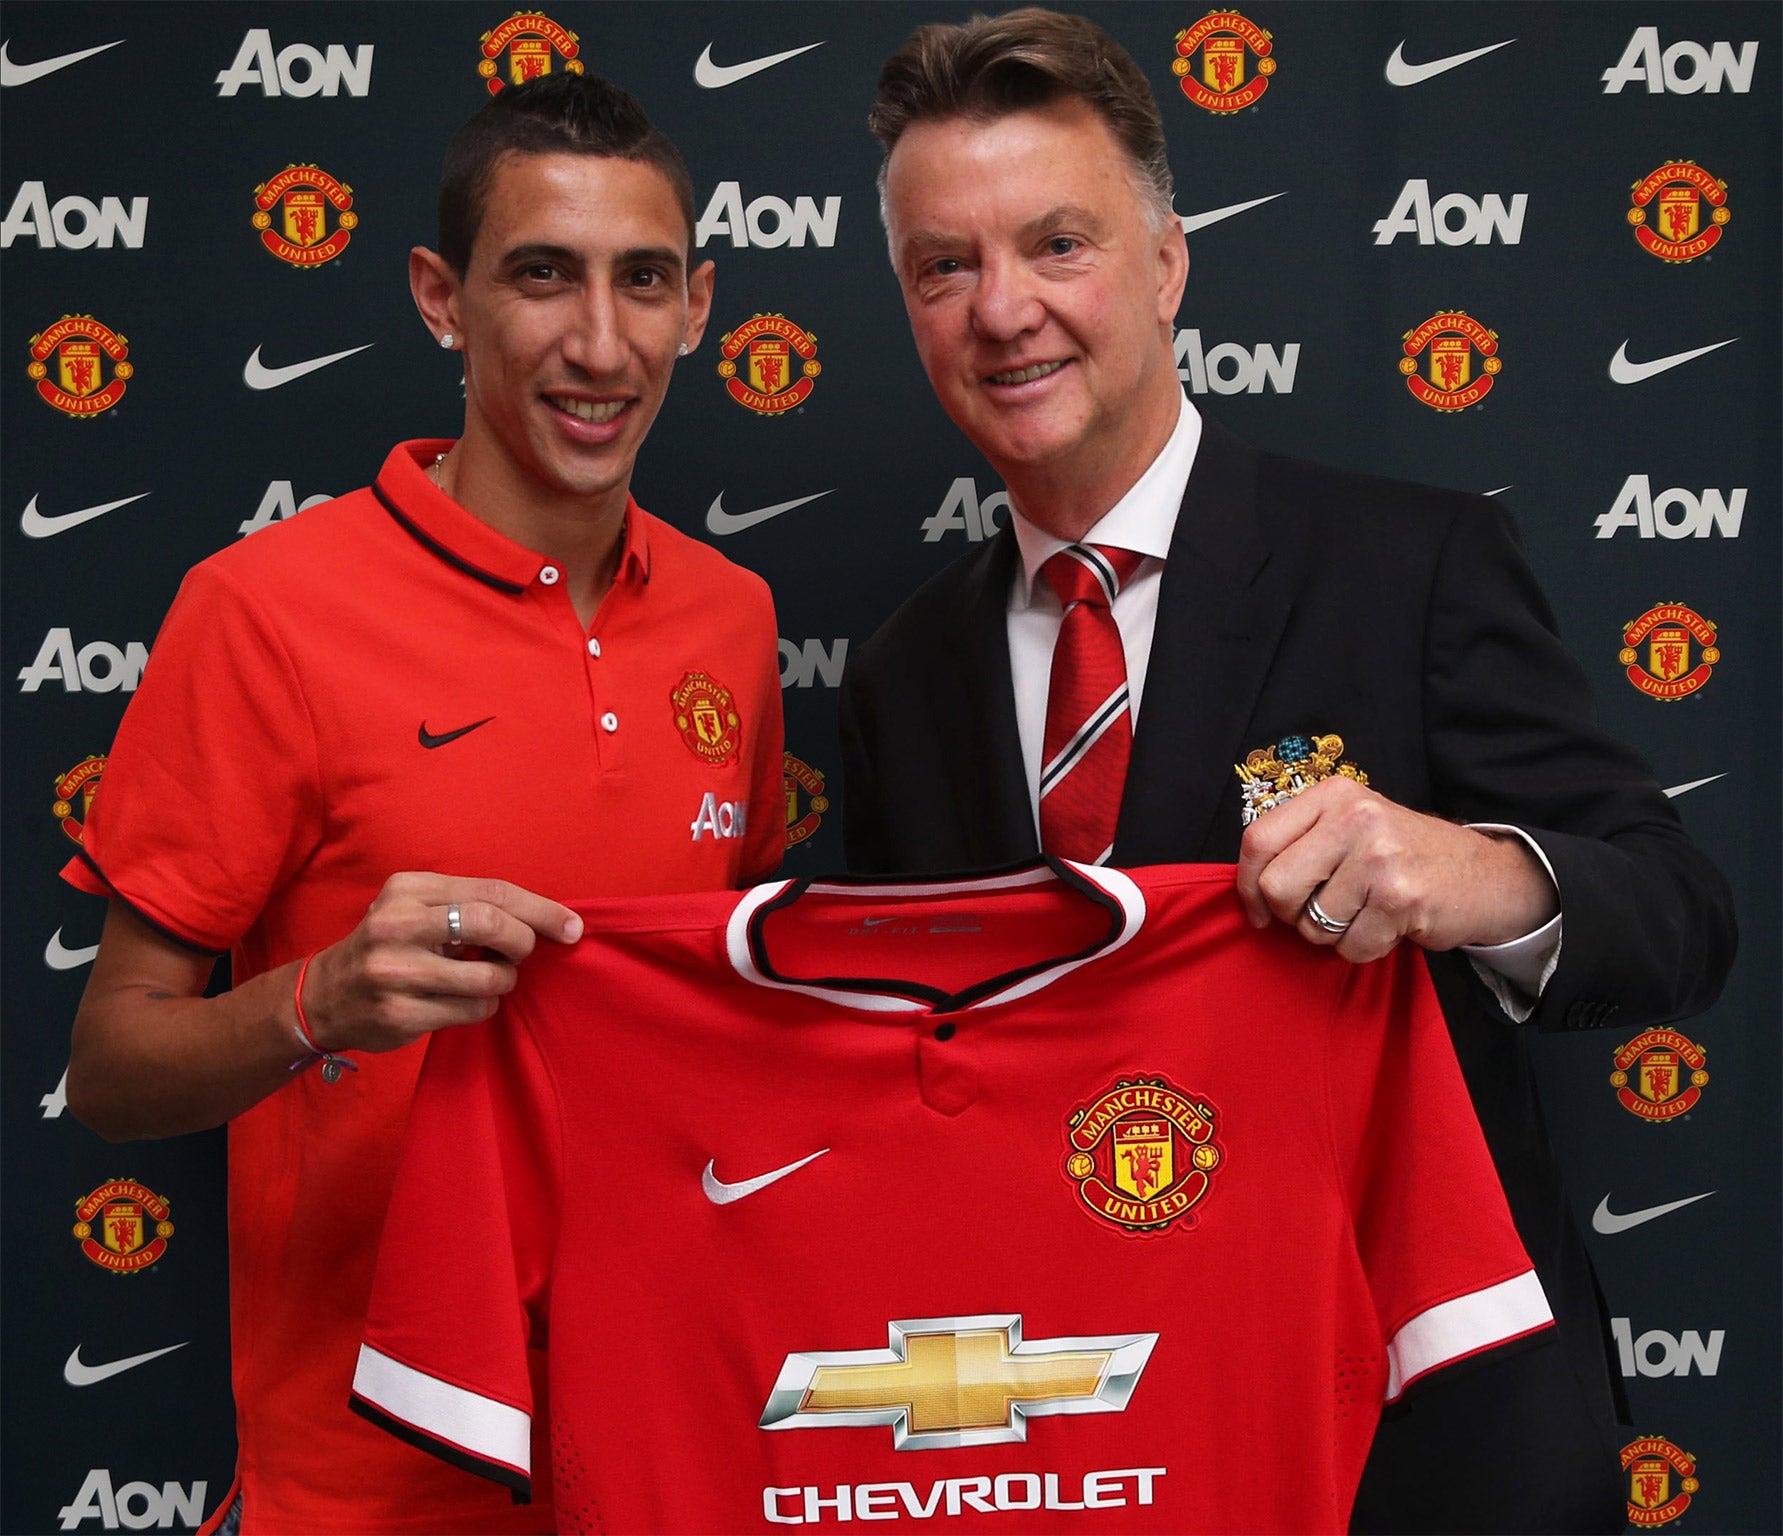 Angel Di Maria poses with Louis van Gaal after signing for Manchester United